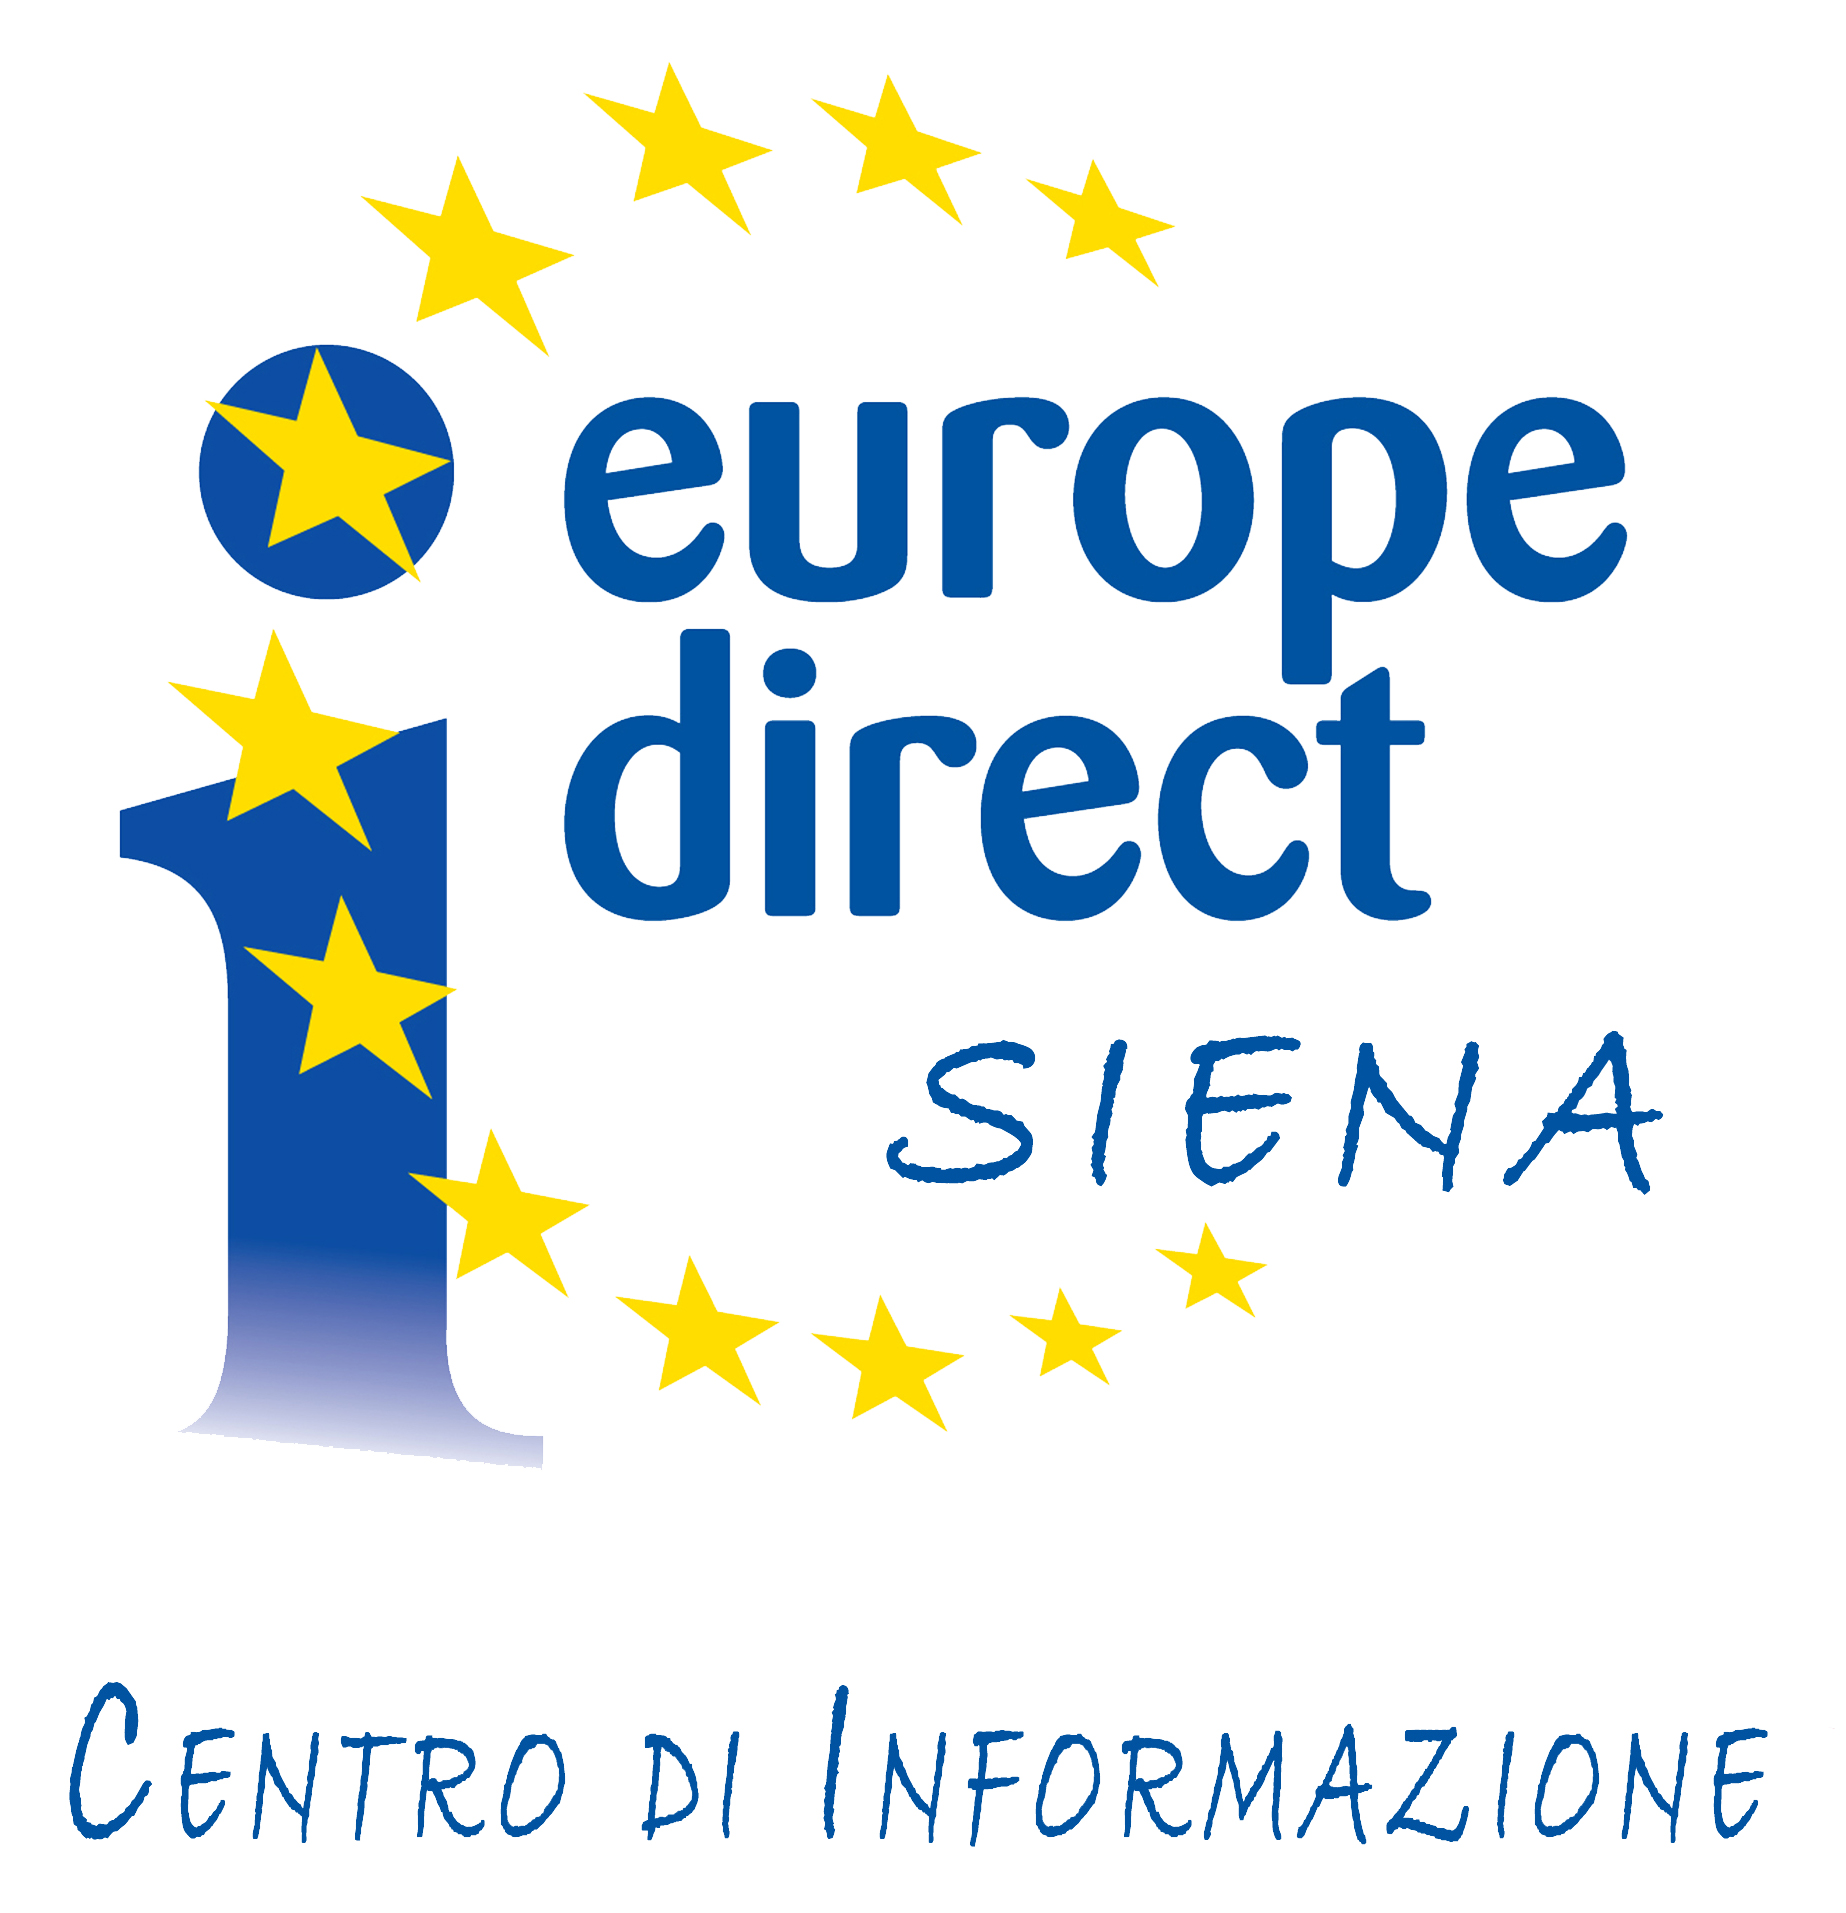 Europe Direct new